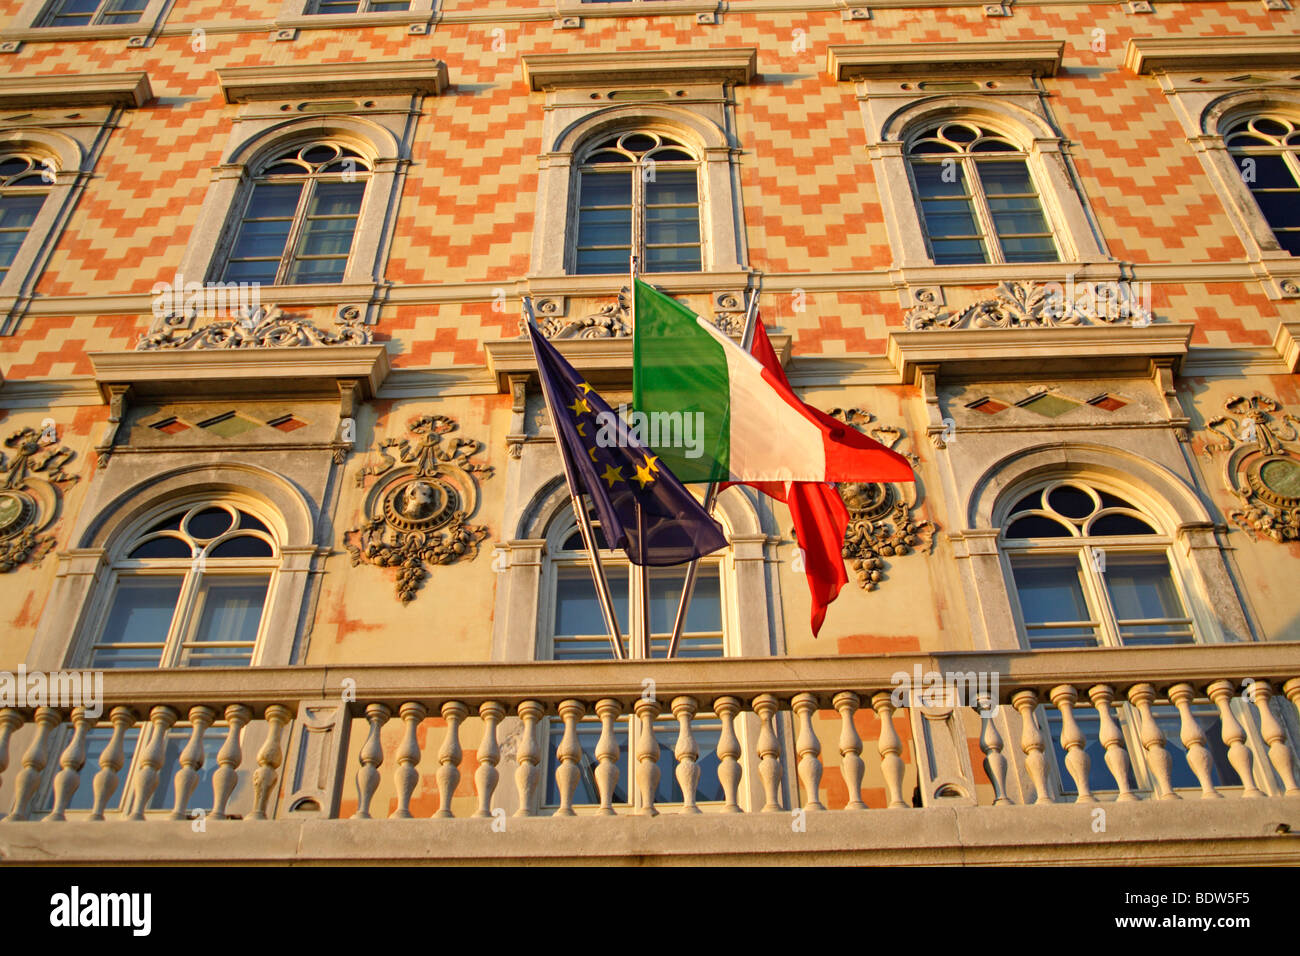 Decorative facade of the Museum of the Grand Canal with Italian and EU flags, Triest, Italy, Europe Stock Photo